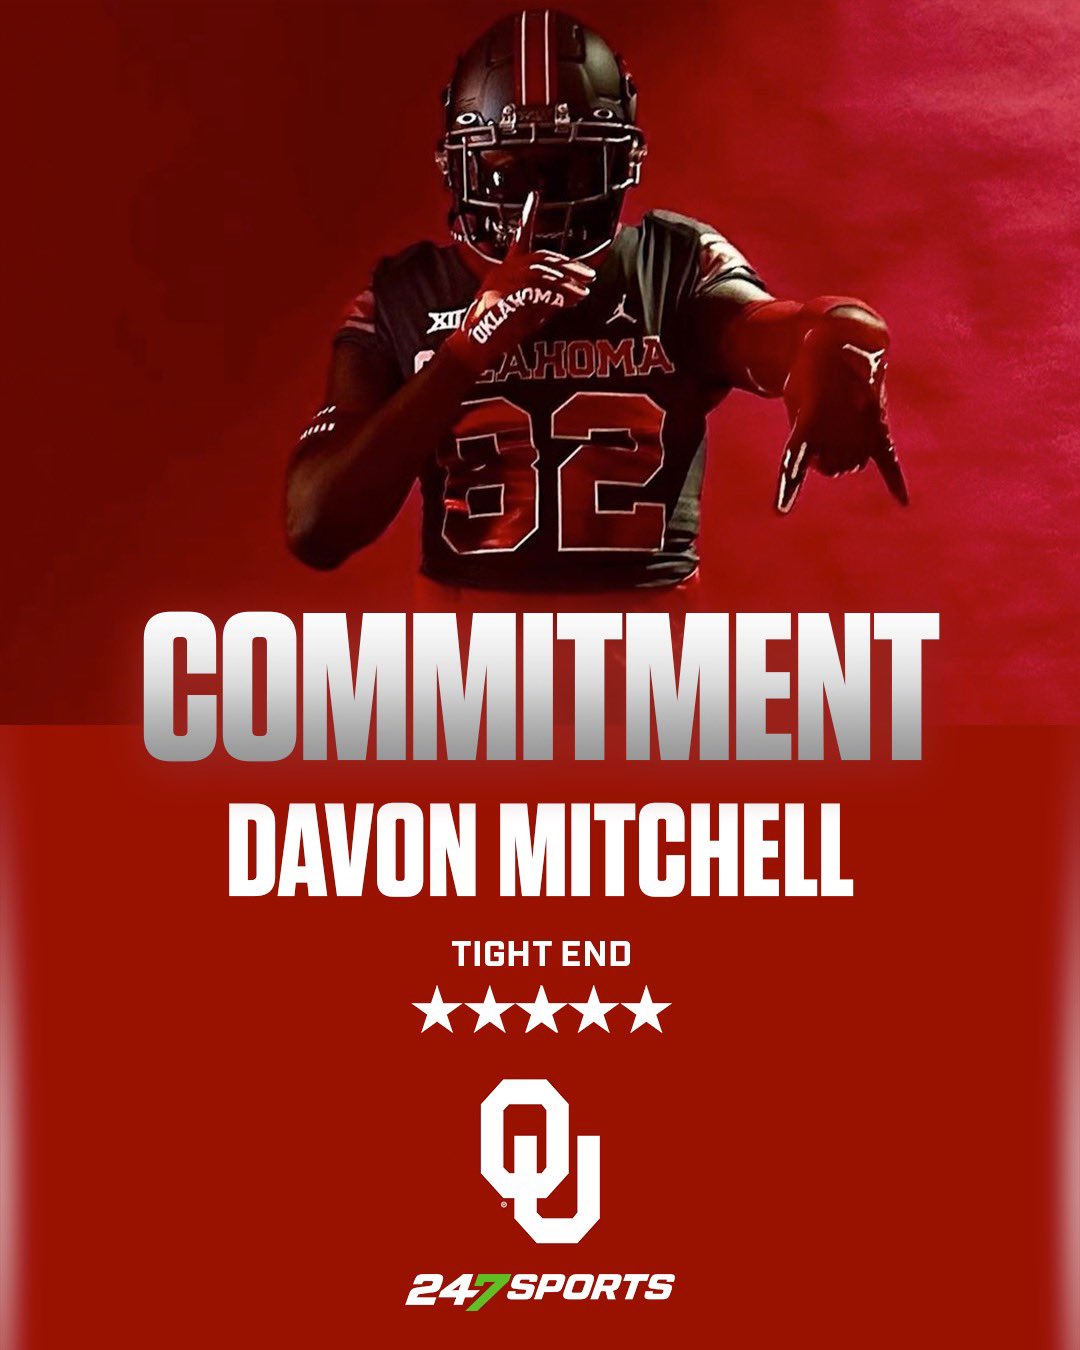 Greg Biggins on Twitter: "BREAKING: Los Alamitos (Calif.) TE Davon Mitchell has committed to #Oklahoma and will re-classify from the class of '25 in to the class of '24 https://t.co/FKu9h724Zg https://t.co/CmLU8zTLke" /